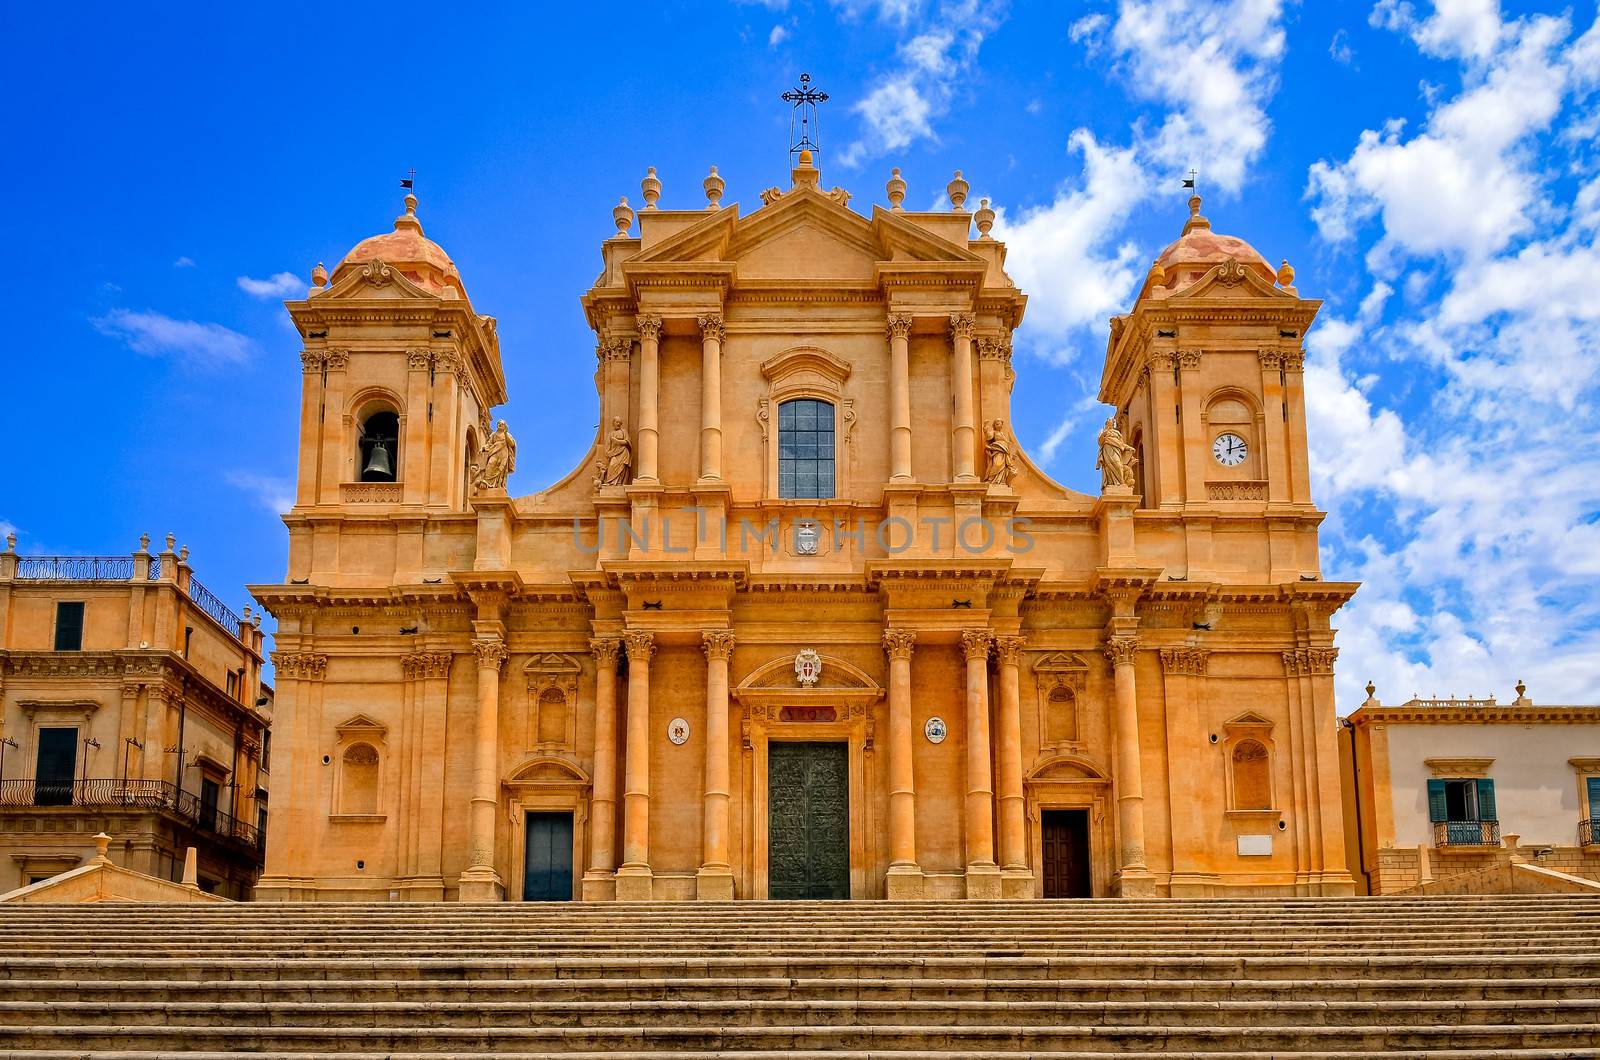 Baroque style cathedral in old town Noto, Sicily by martinm303